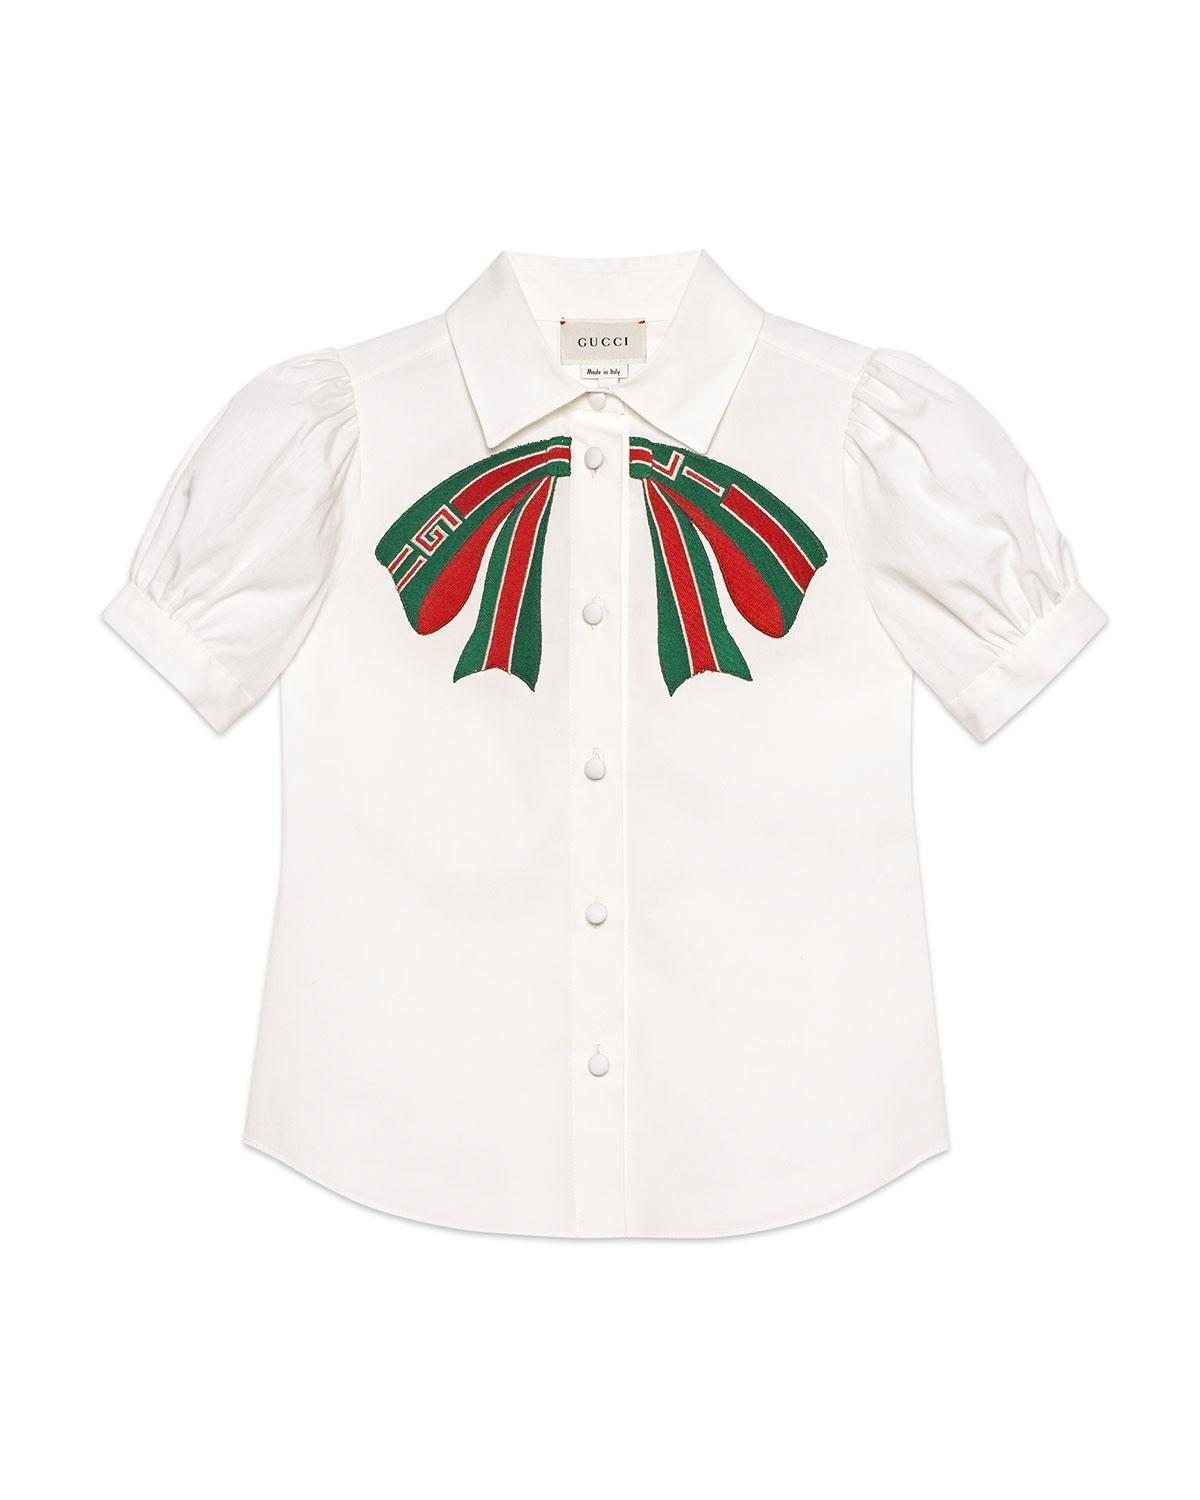 Puffy White Logo - Lyst - Gucci Puffy-sleeve Collared Top W/ Logo Bow Applique in White